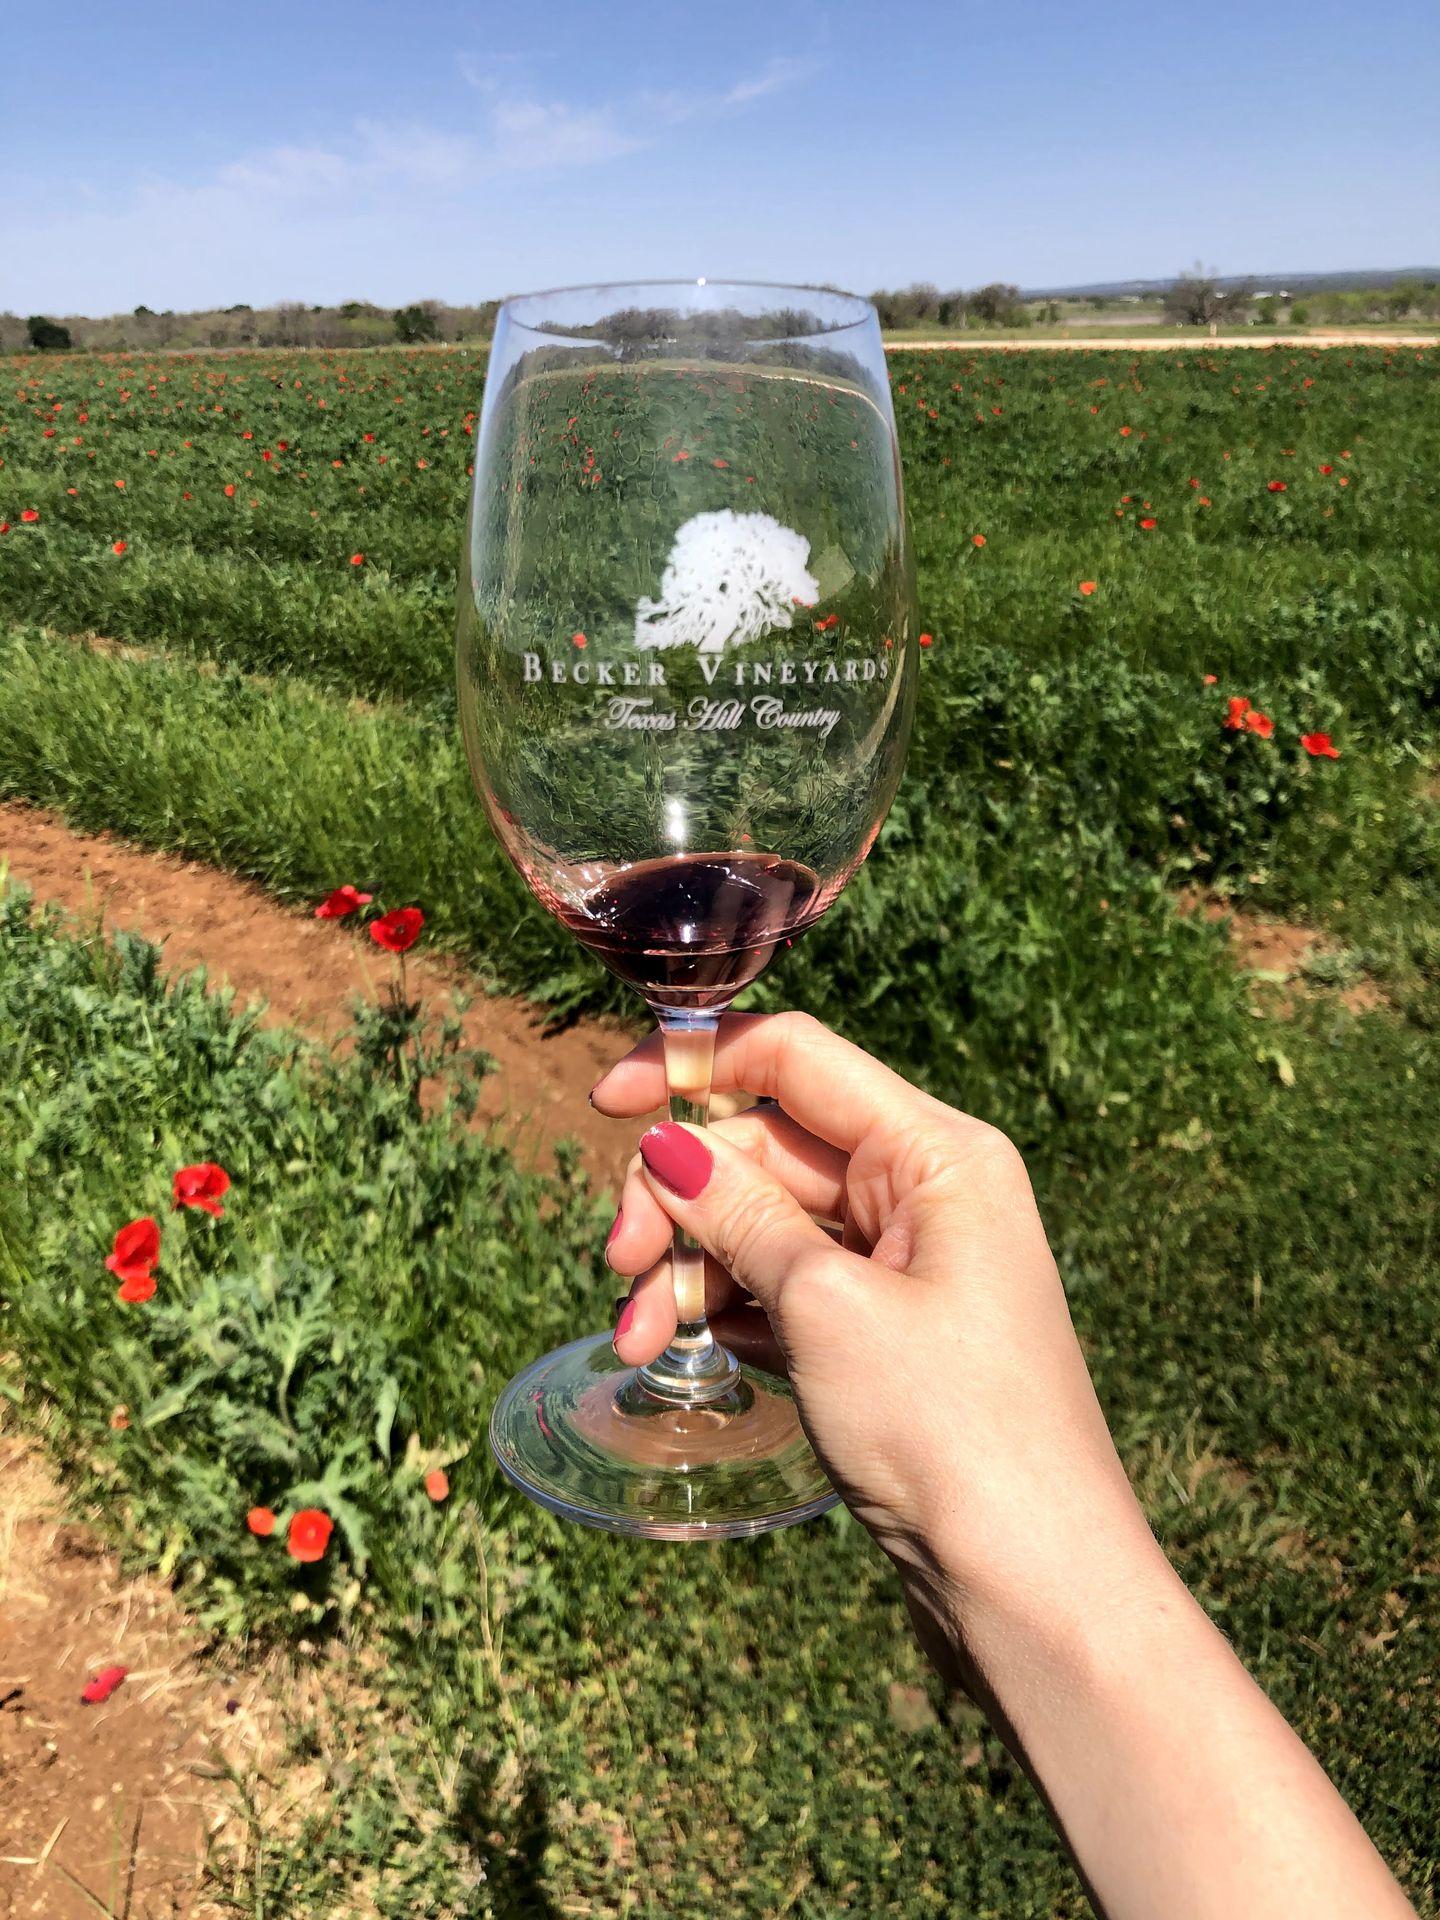 Holding up a red wine tasting in a wine glass labaled "Becker Vineyards" in front of a field of red poppies.